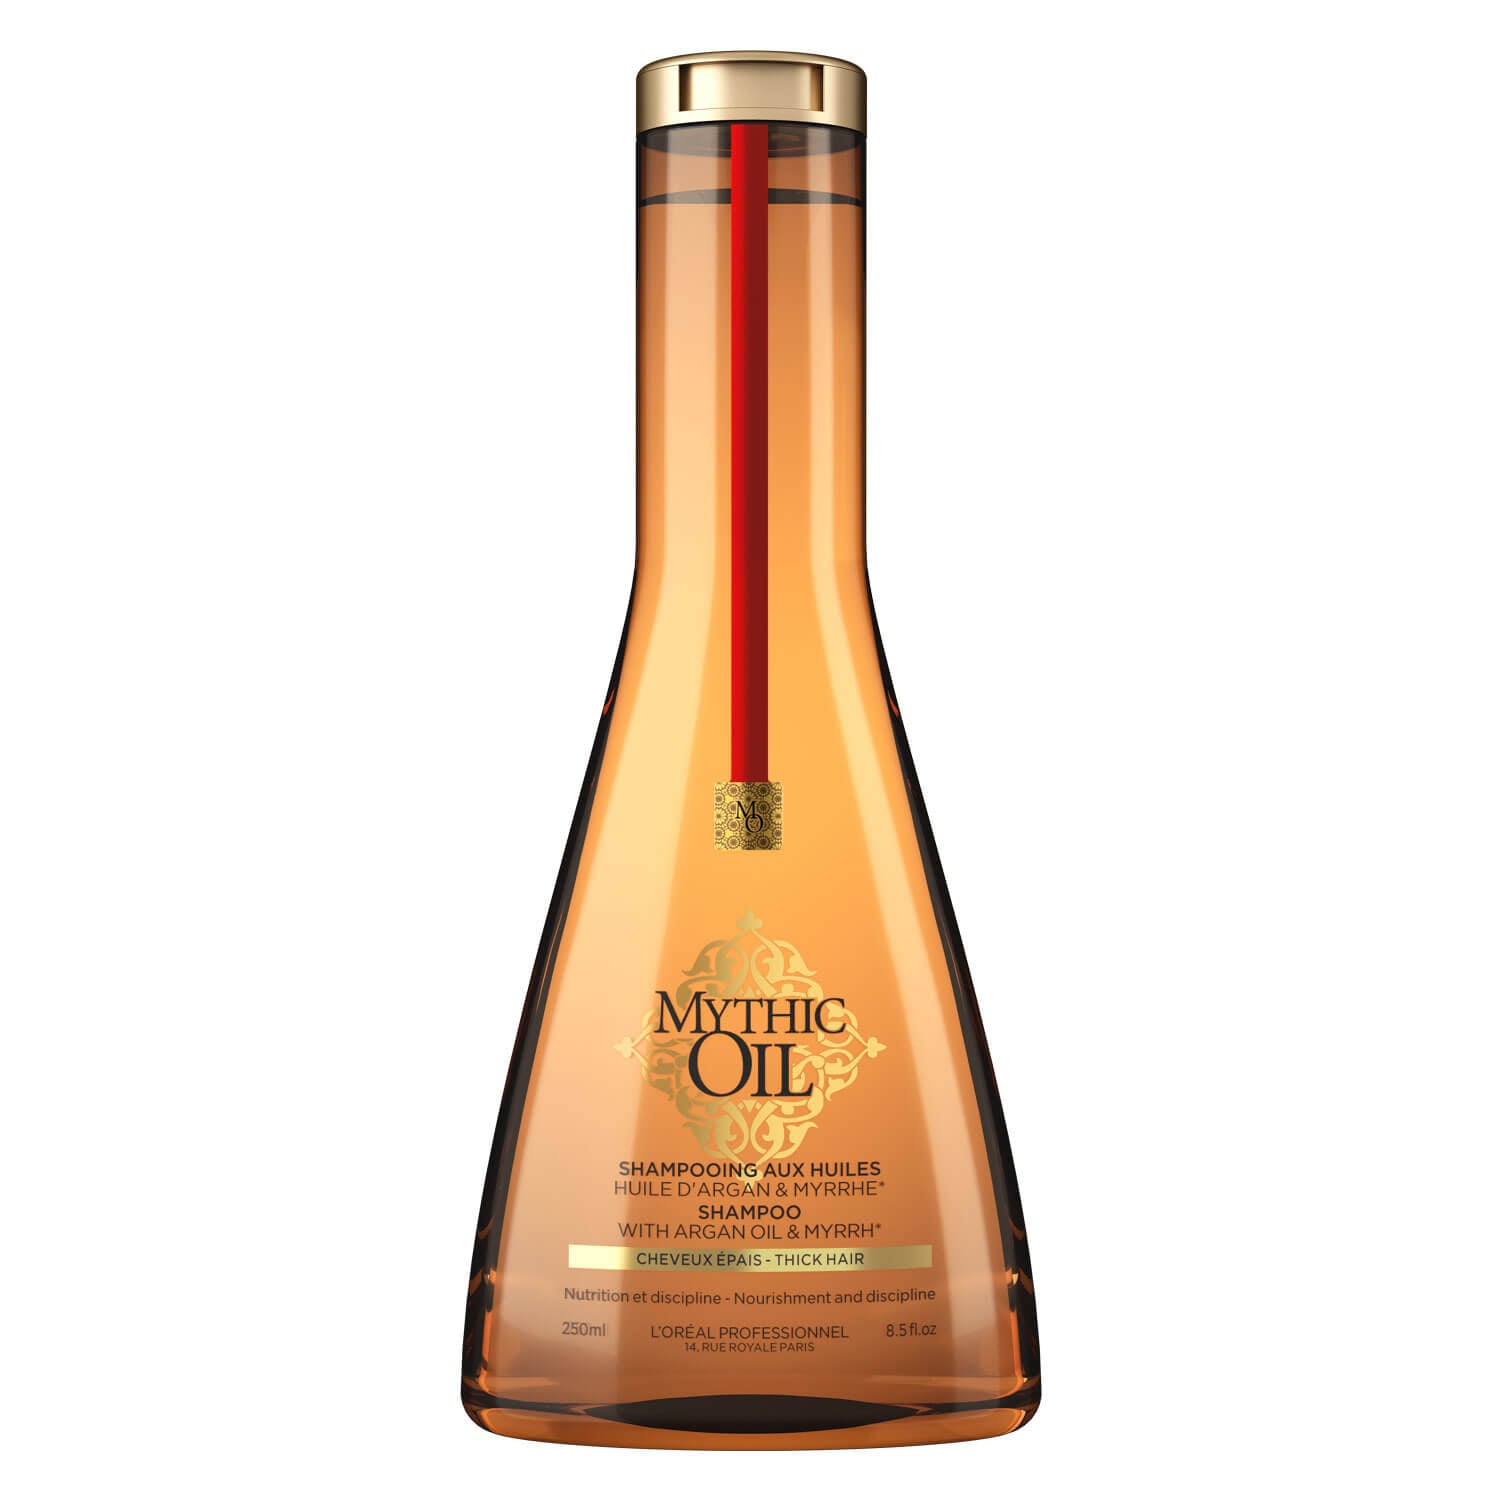 Buy L'Oreal Mythic Oil - Shampoo Thick Hair, 250ml | cosmeticsdiarypk 100% Original Beauty Products